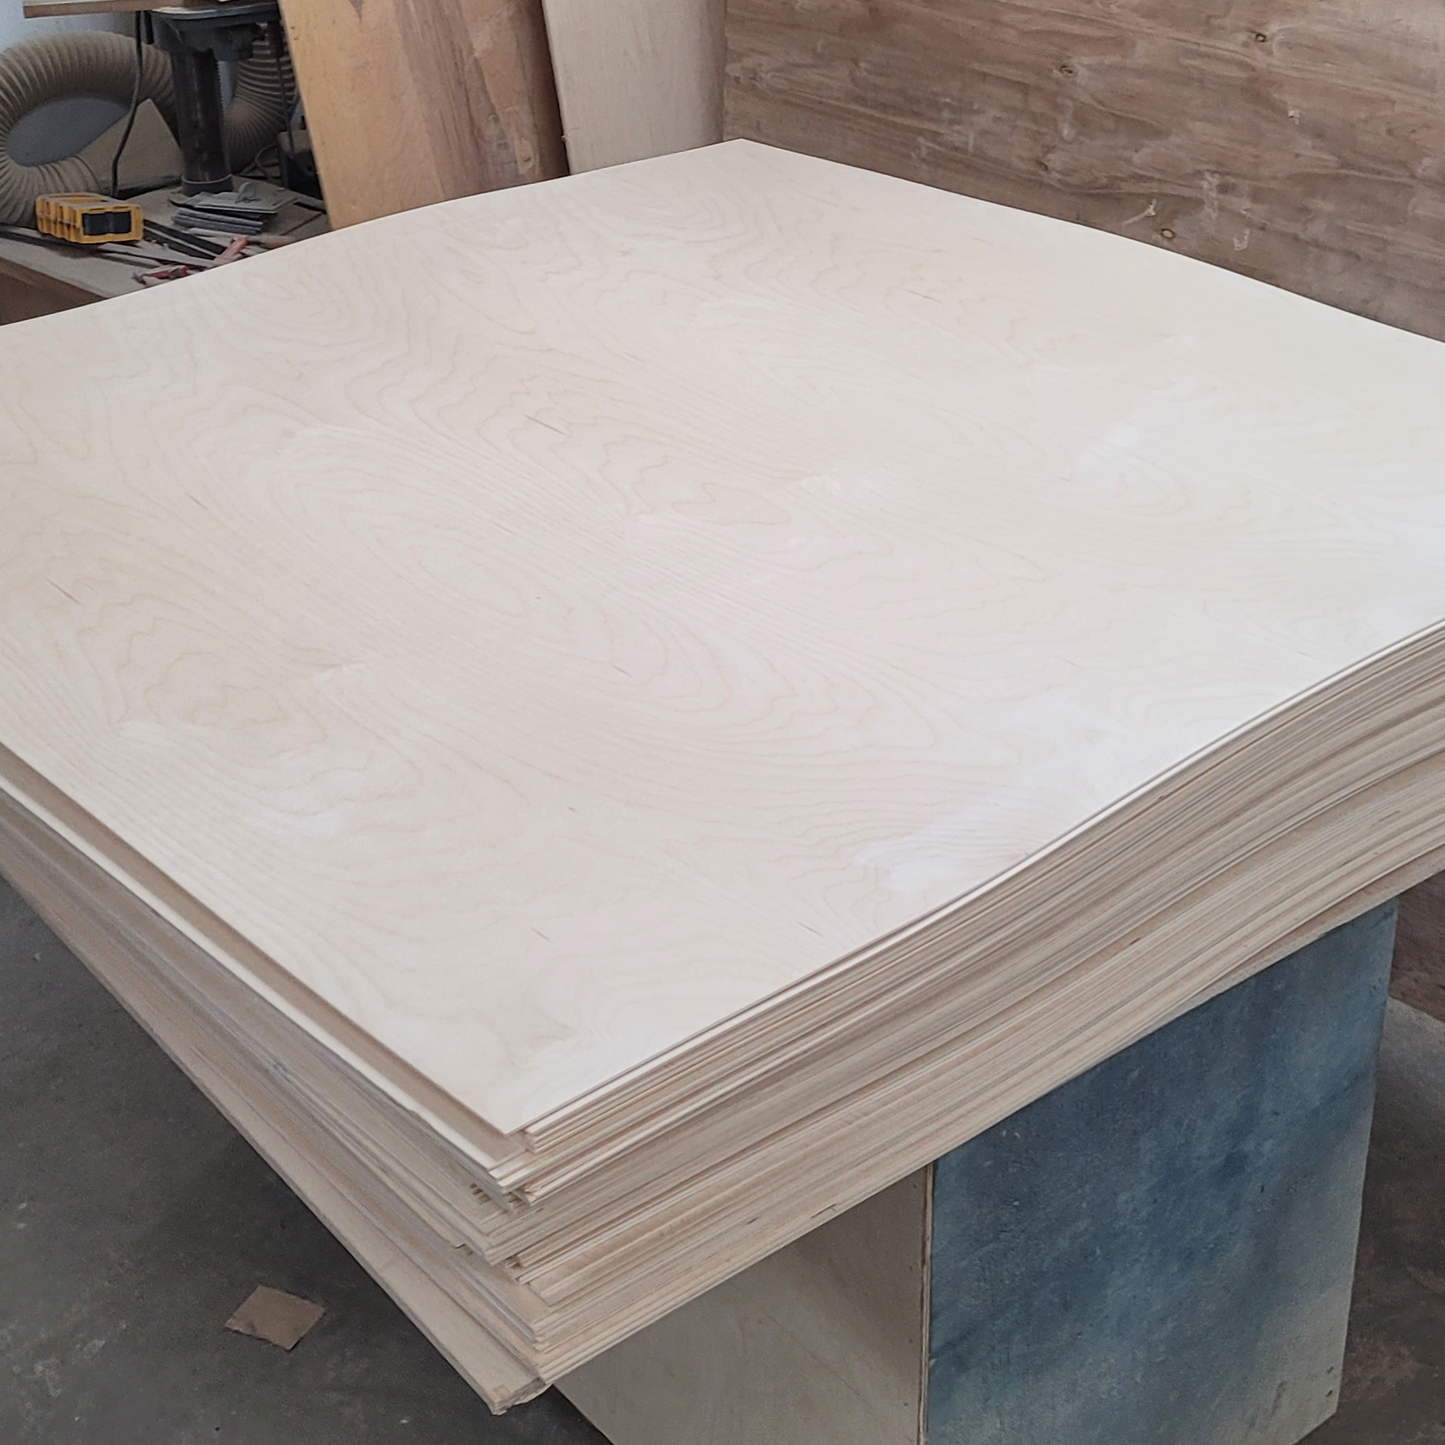 LOCAL PICK UP ONLY - 1/8" B/BB - Premium Baltic Birch Plywood Full Sheets 5 ft x 5 ft